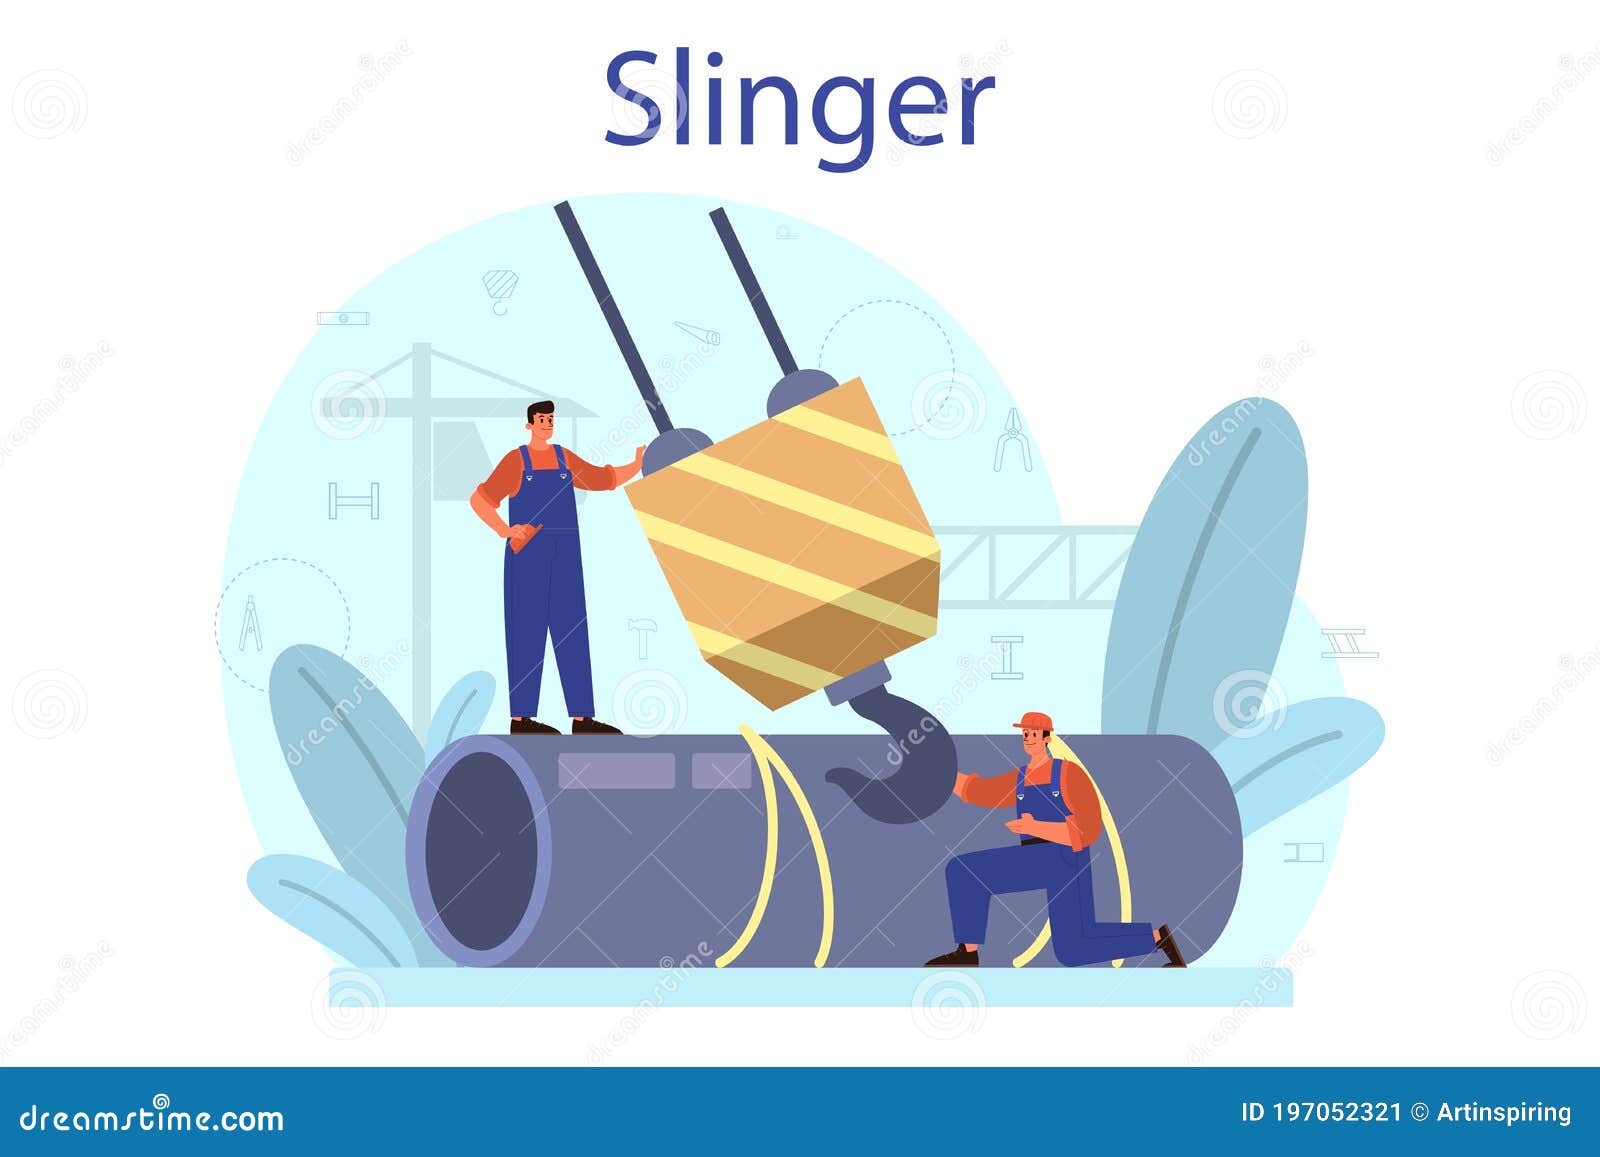 slinger. professional workers of constructing industry slinging